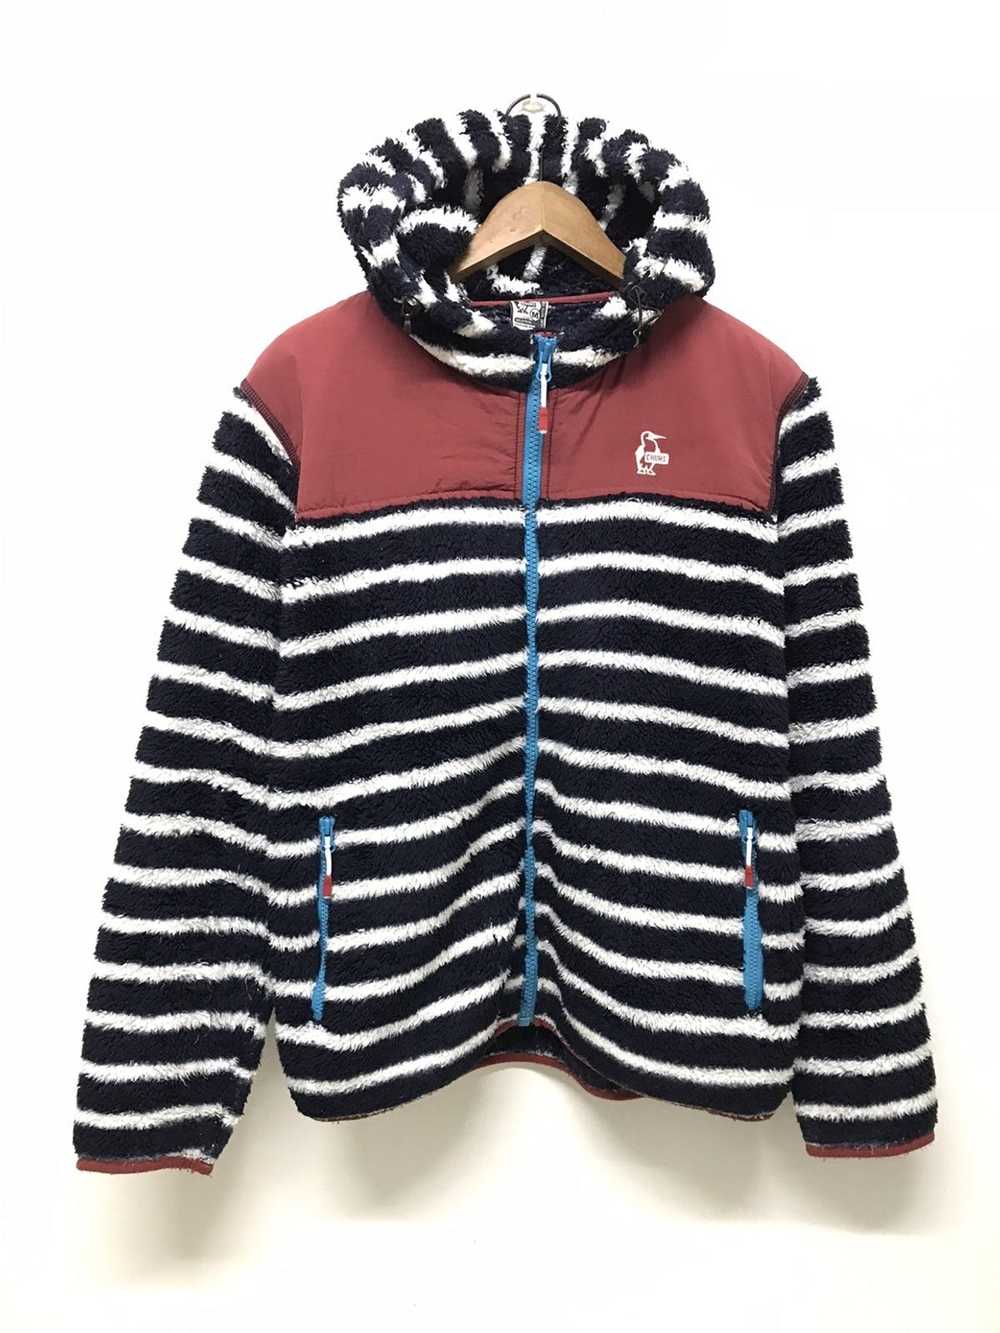 Chums × Outdoor Life Chums Hoodie Jacket - image 1